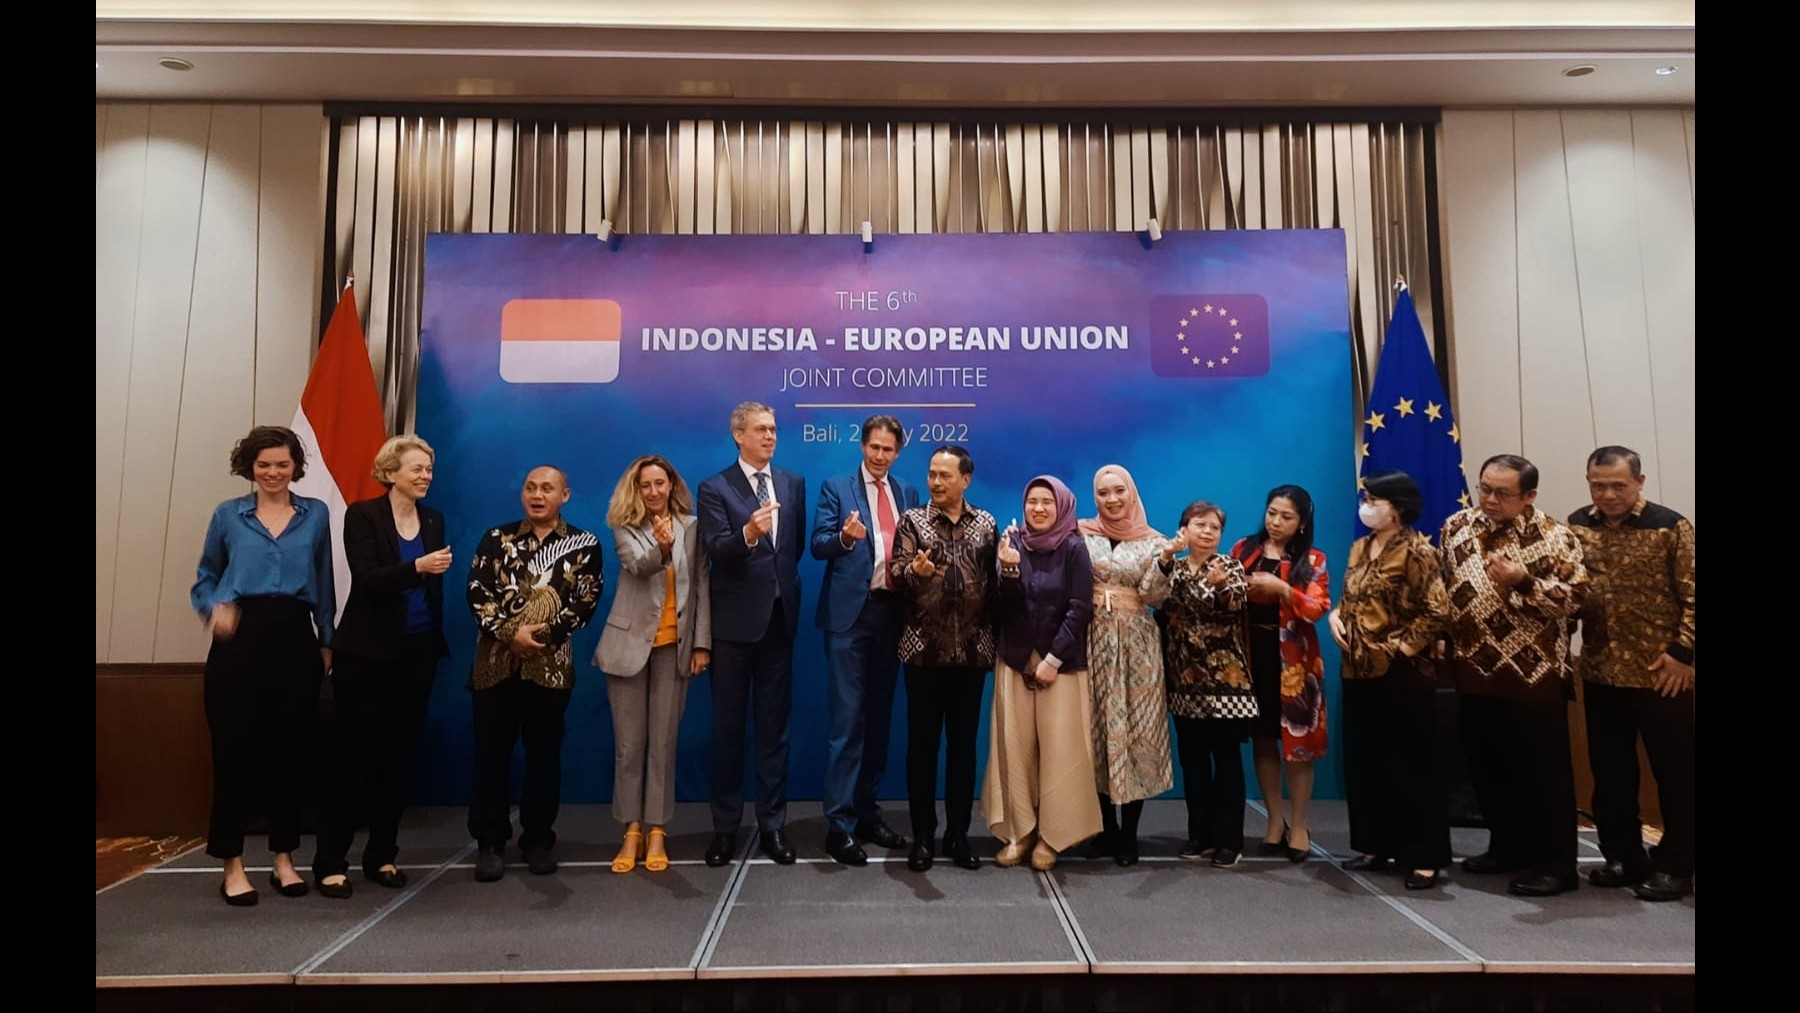 The 6th Indonesia-European Union Joint Committee